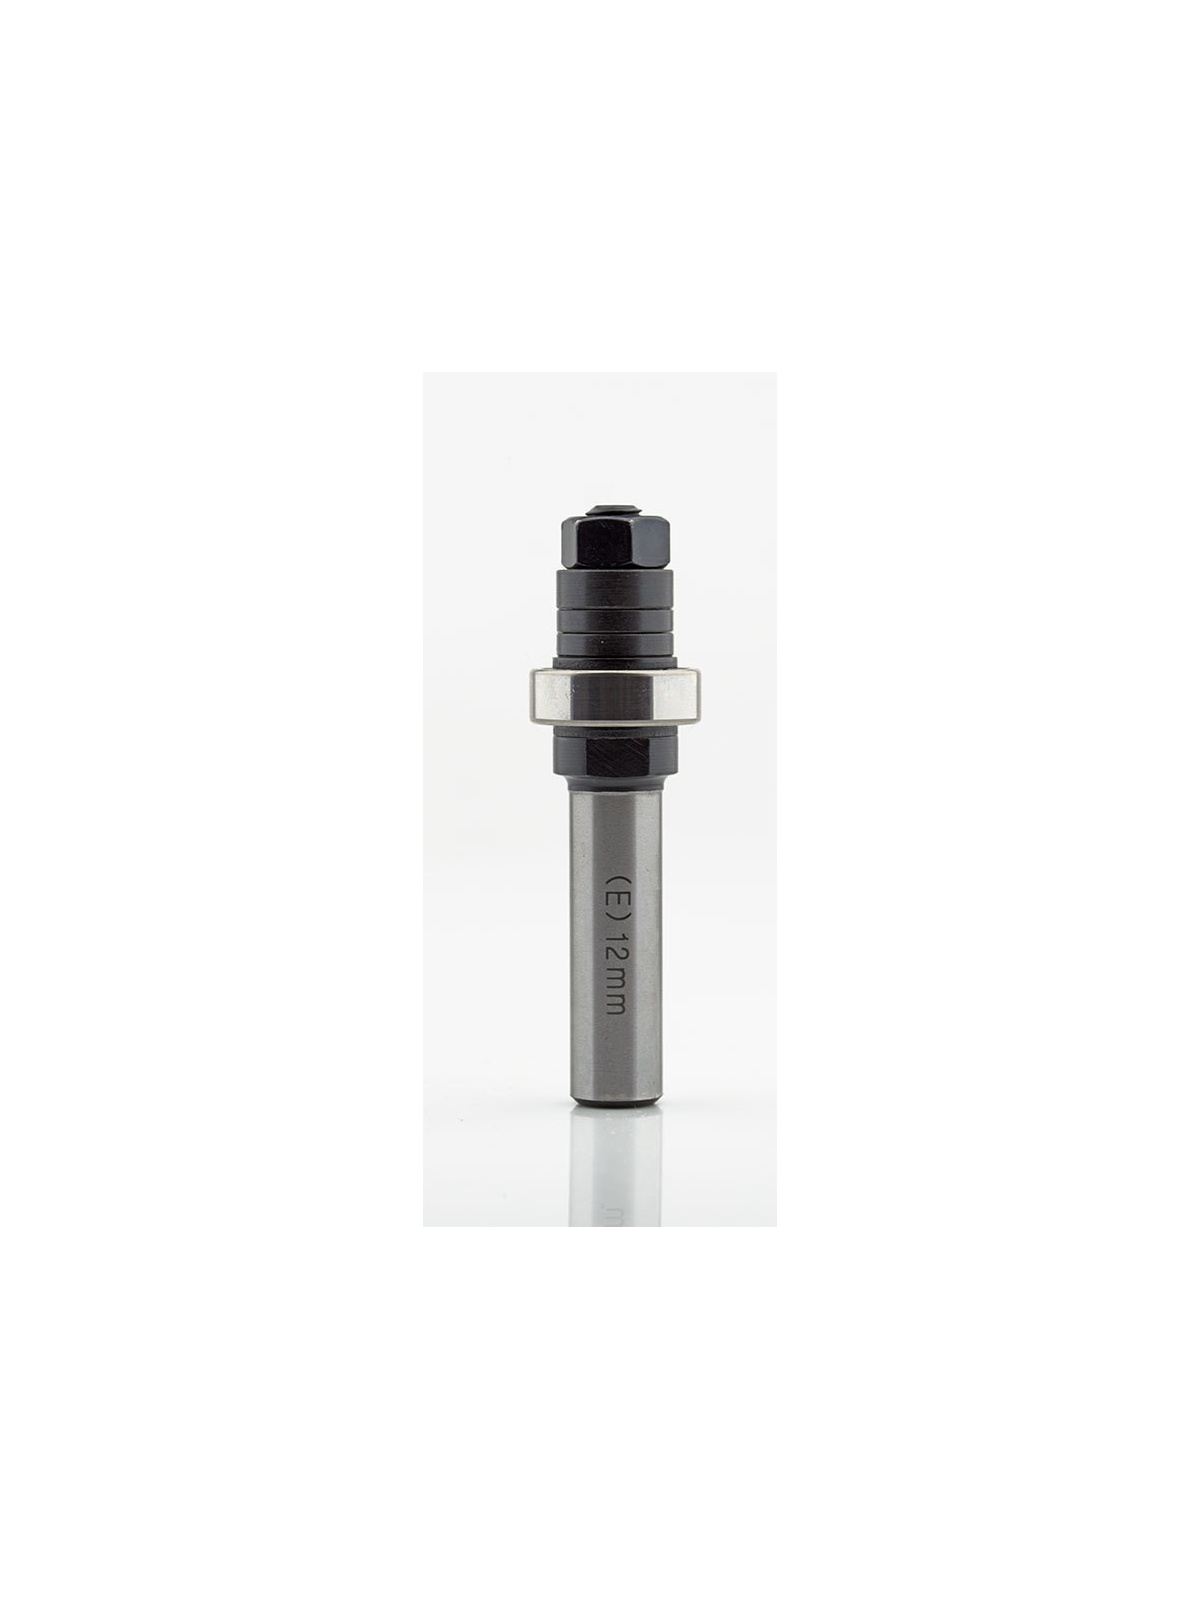 ENT ENT arbor with ball bearing 12mm-8mm | JVL-Europe